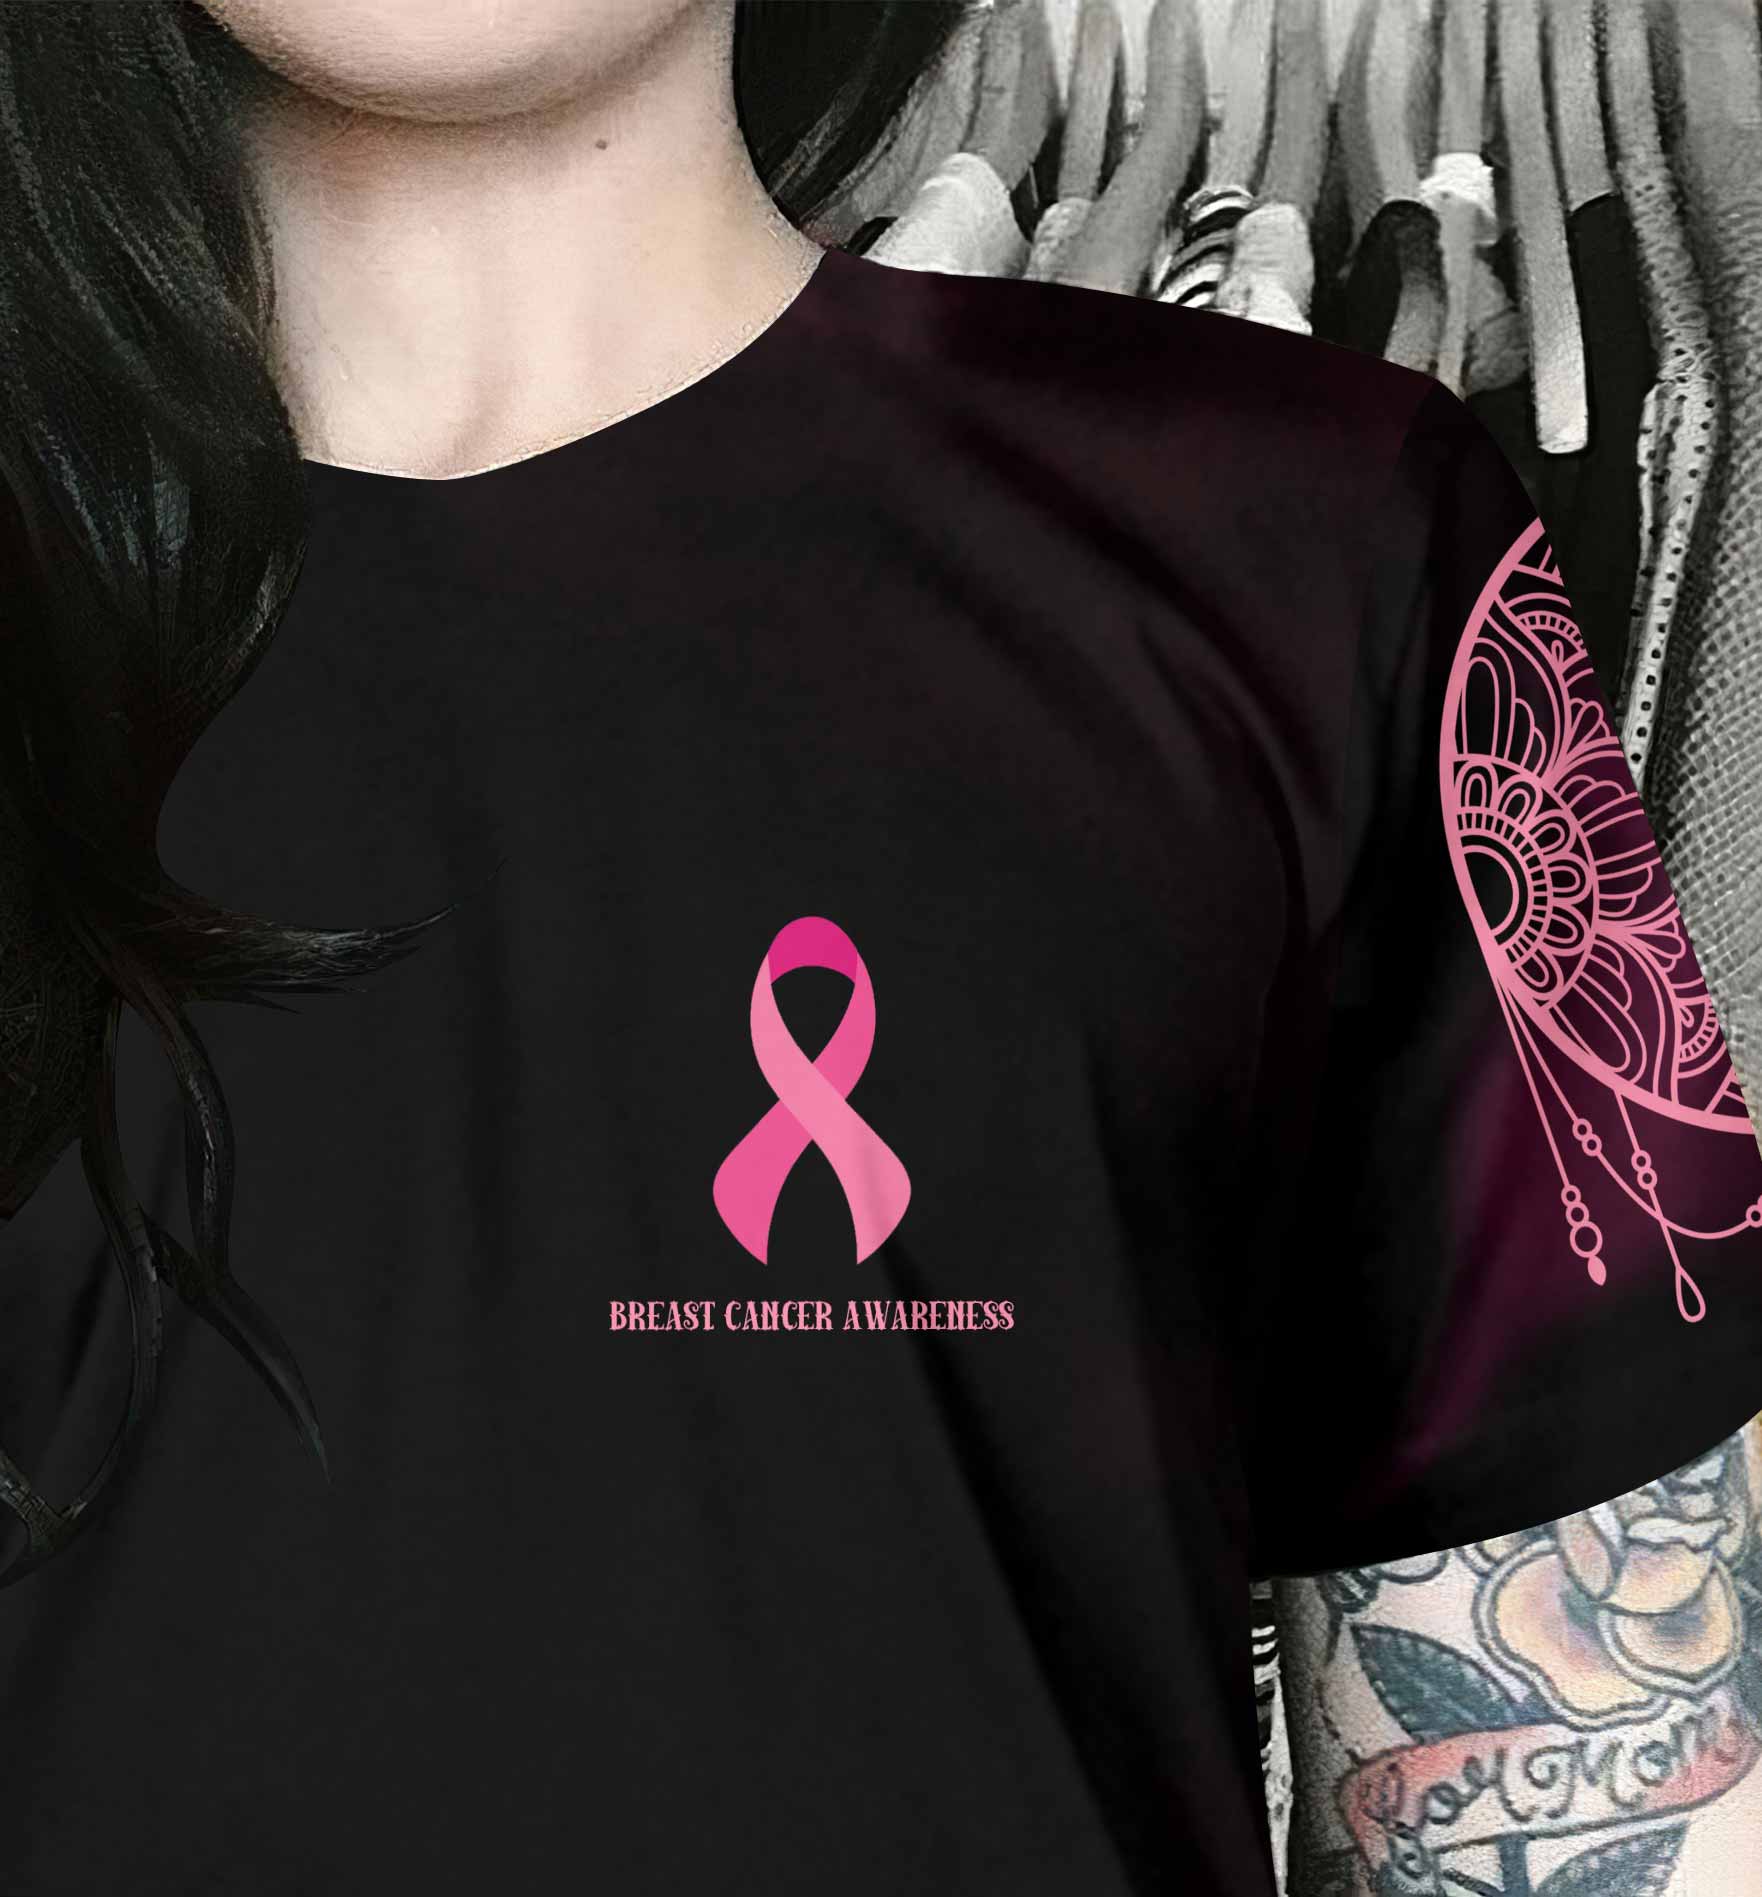 In October We Wear Pink - Breast Cancer Awareness All Over T-shirt